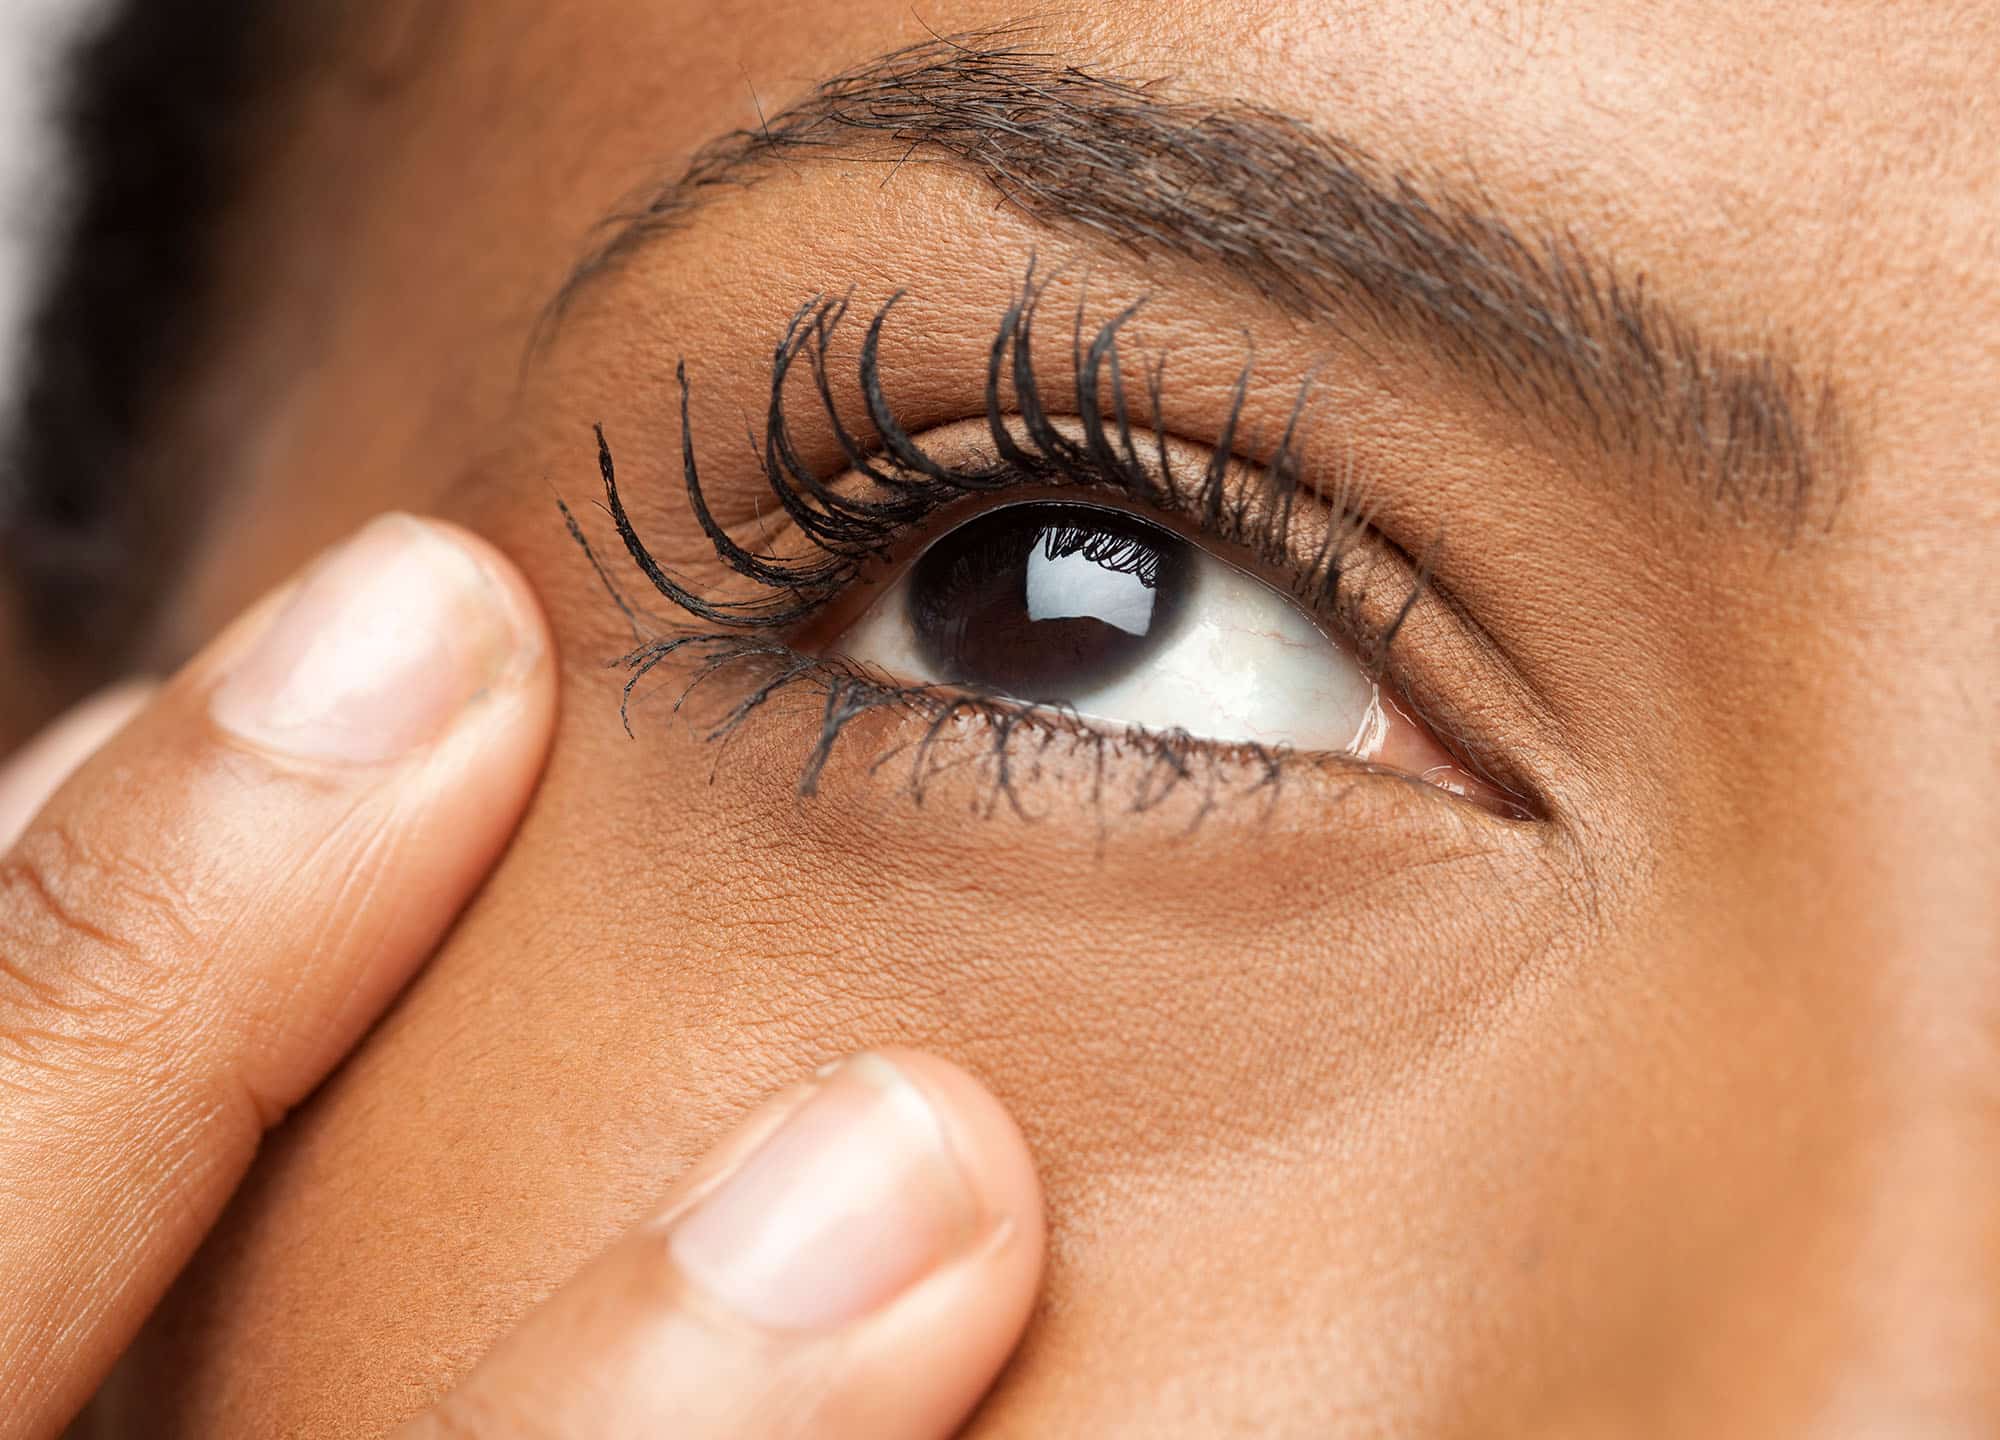 Here's what you need to know about eyelid surgery and eyelid surgery recovery plus answers to common questions about cosmetic eye surgery.